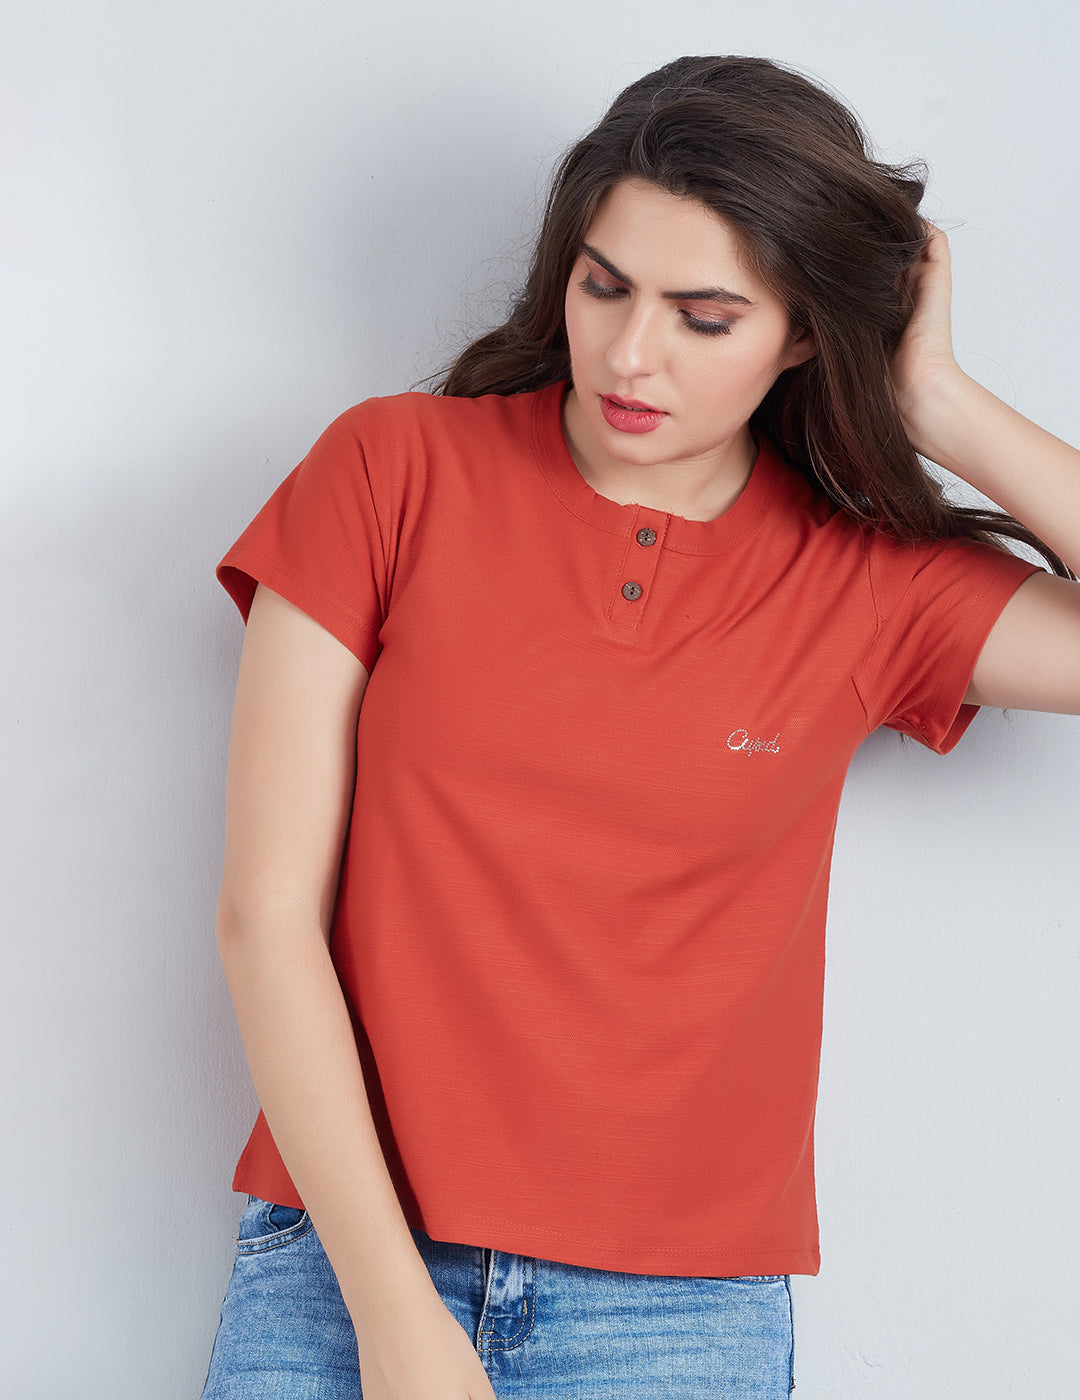 Plain Short T-shirts For Women - Rust At Best Prices